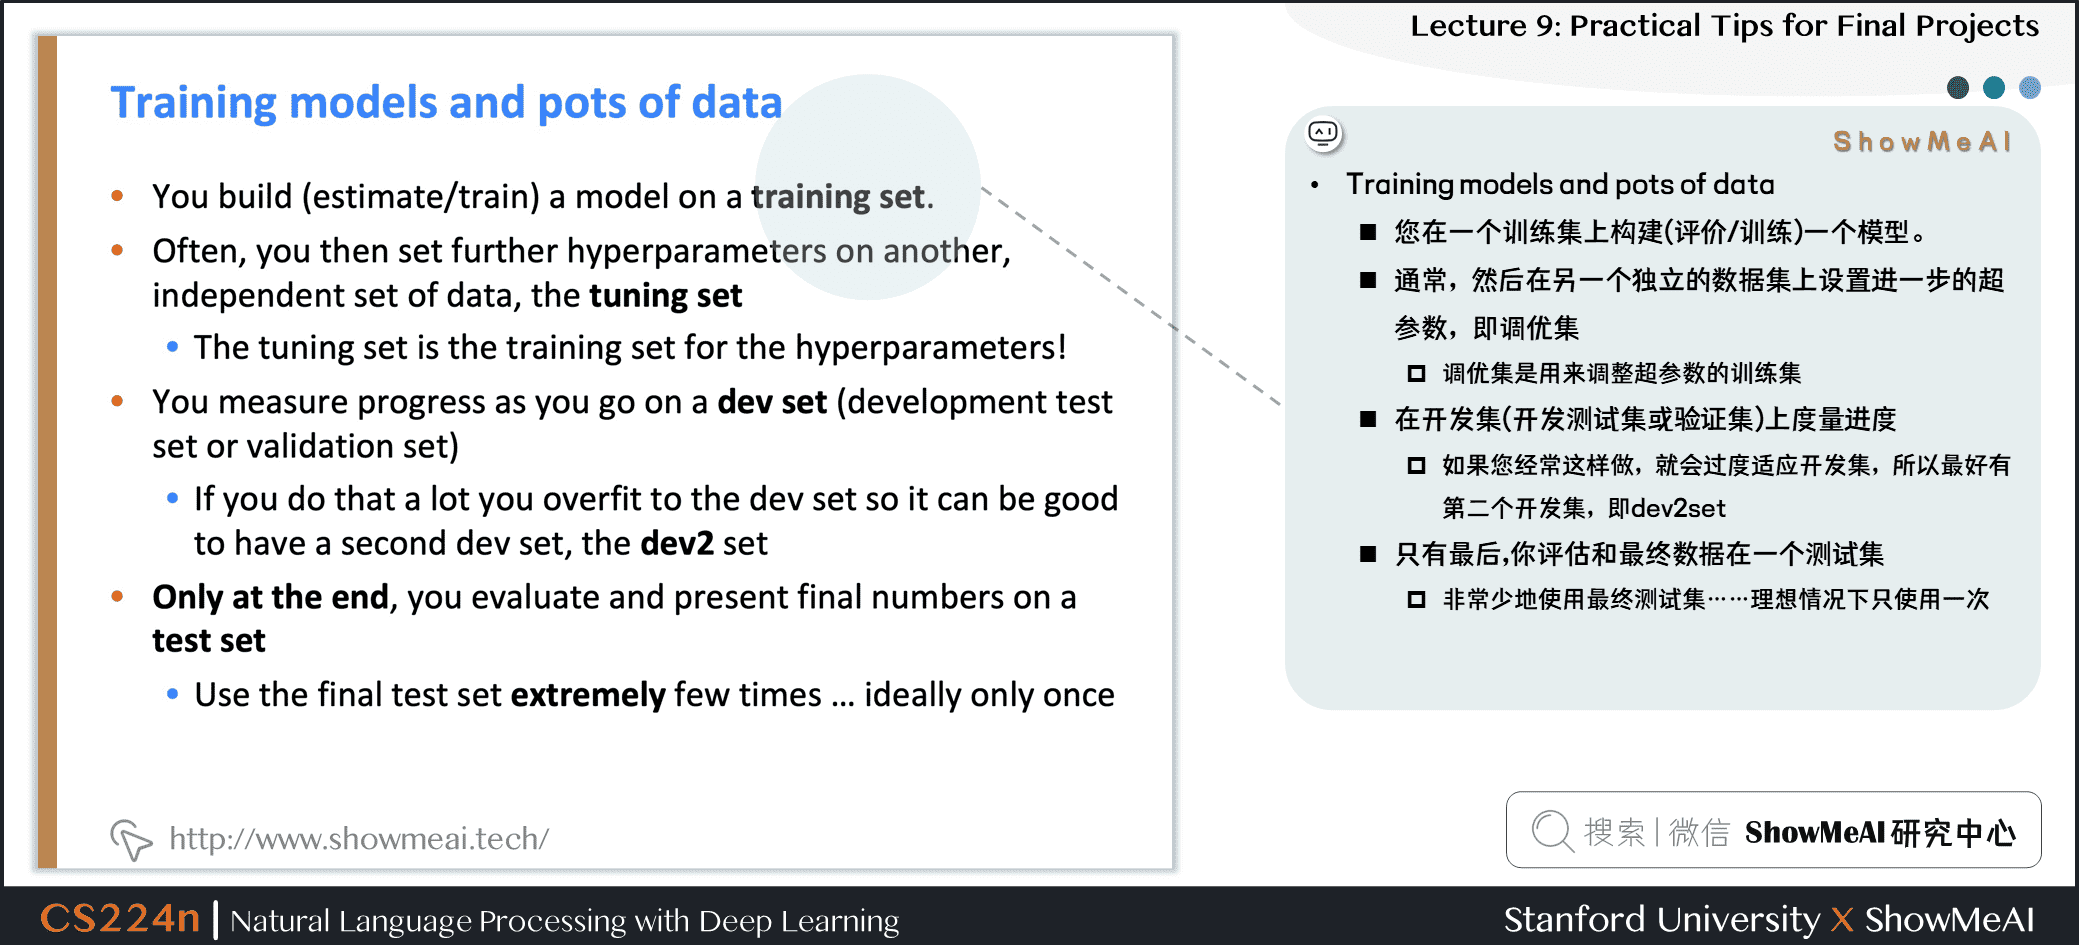 Training models and pots of data